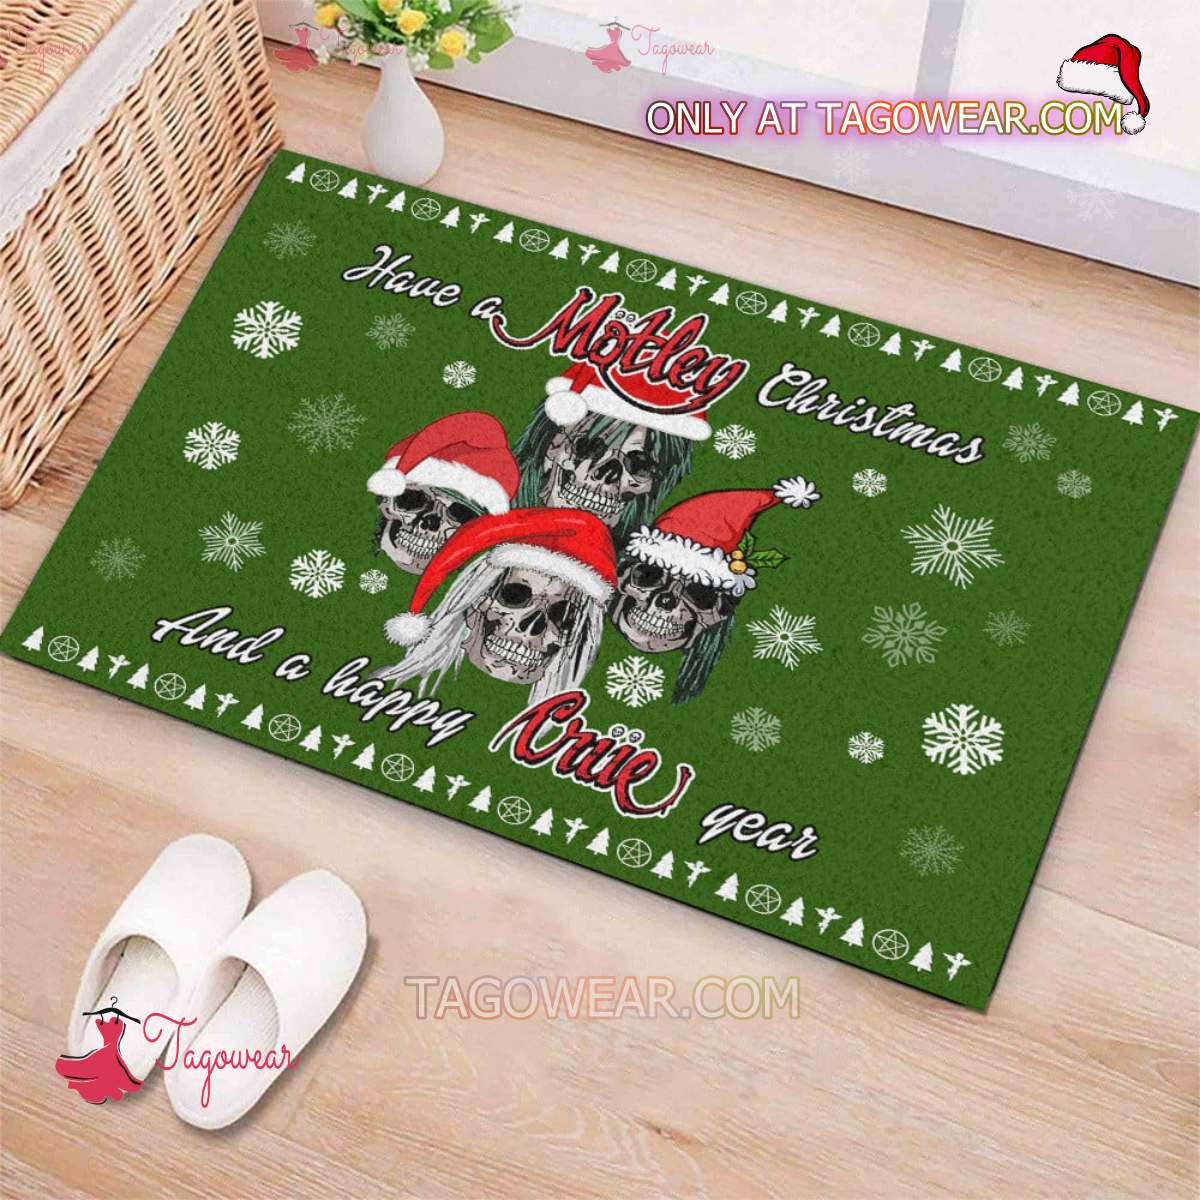 Have A Motley Christmas And A Happy Crue Year Doormat a